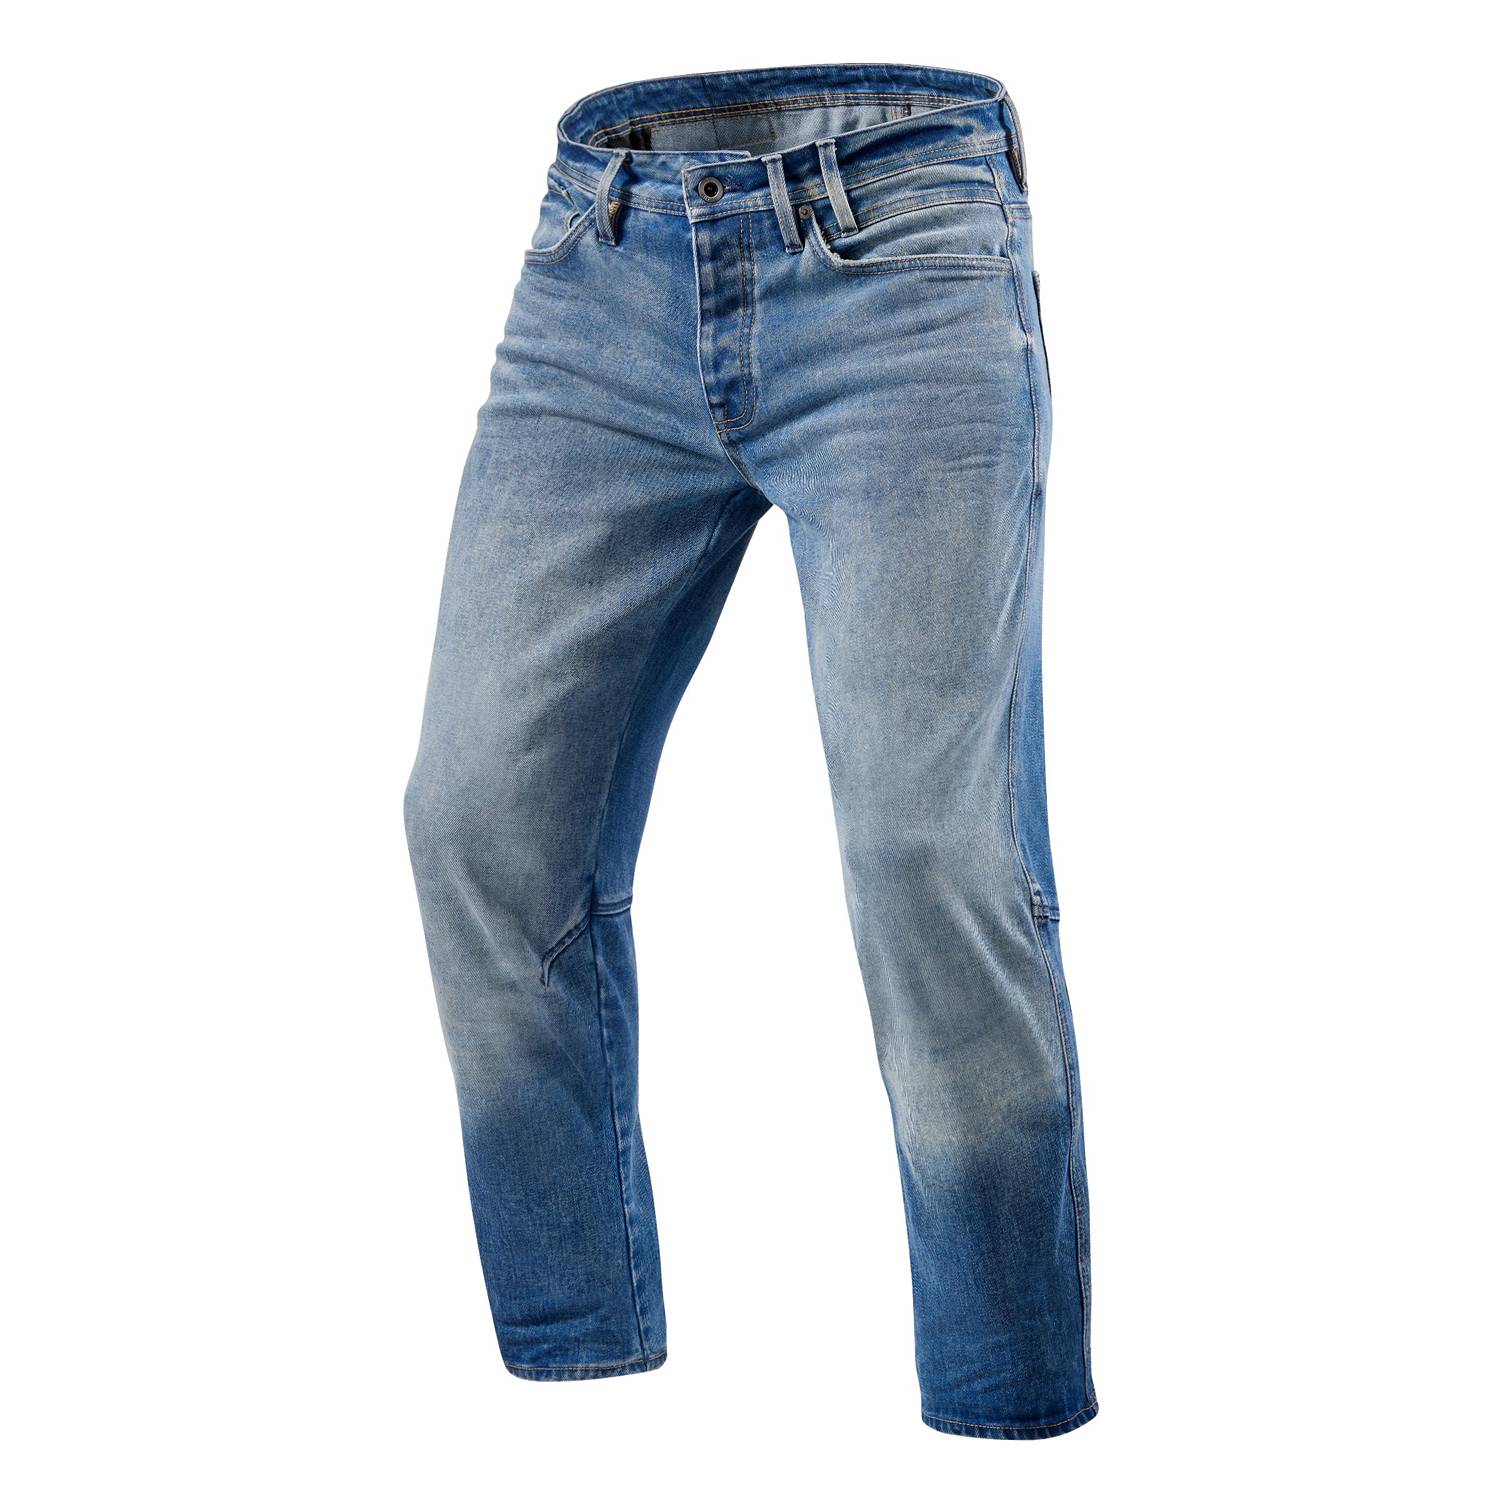 Image of REV'IT! Salt TF Mid Blue Used Motorcycle Jeans Size L32/W30 ID 8700001339131